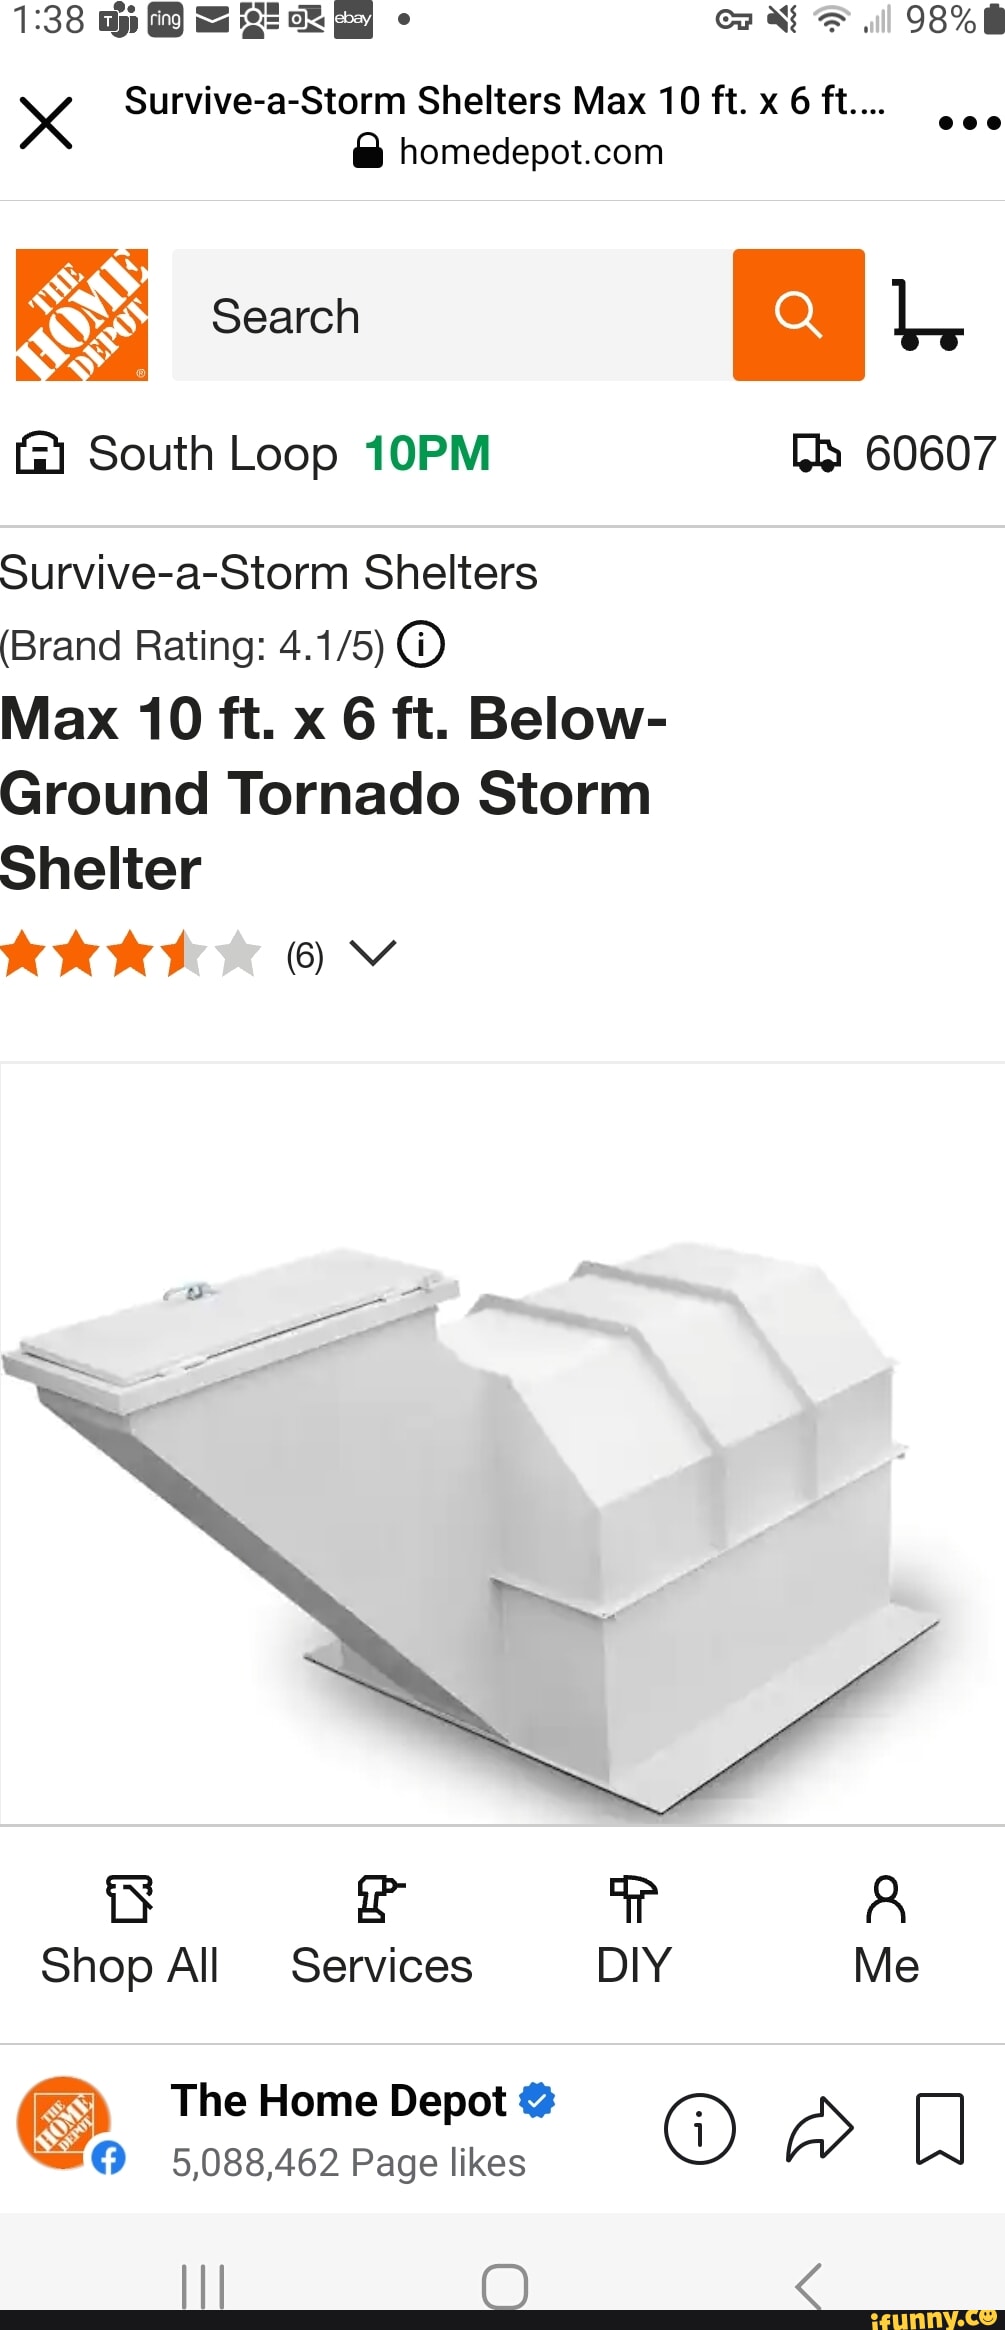 Survive-a-Storm Shelters Max 10 ft. x 6 ft. Below-Ground Tornado